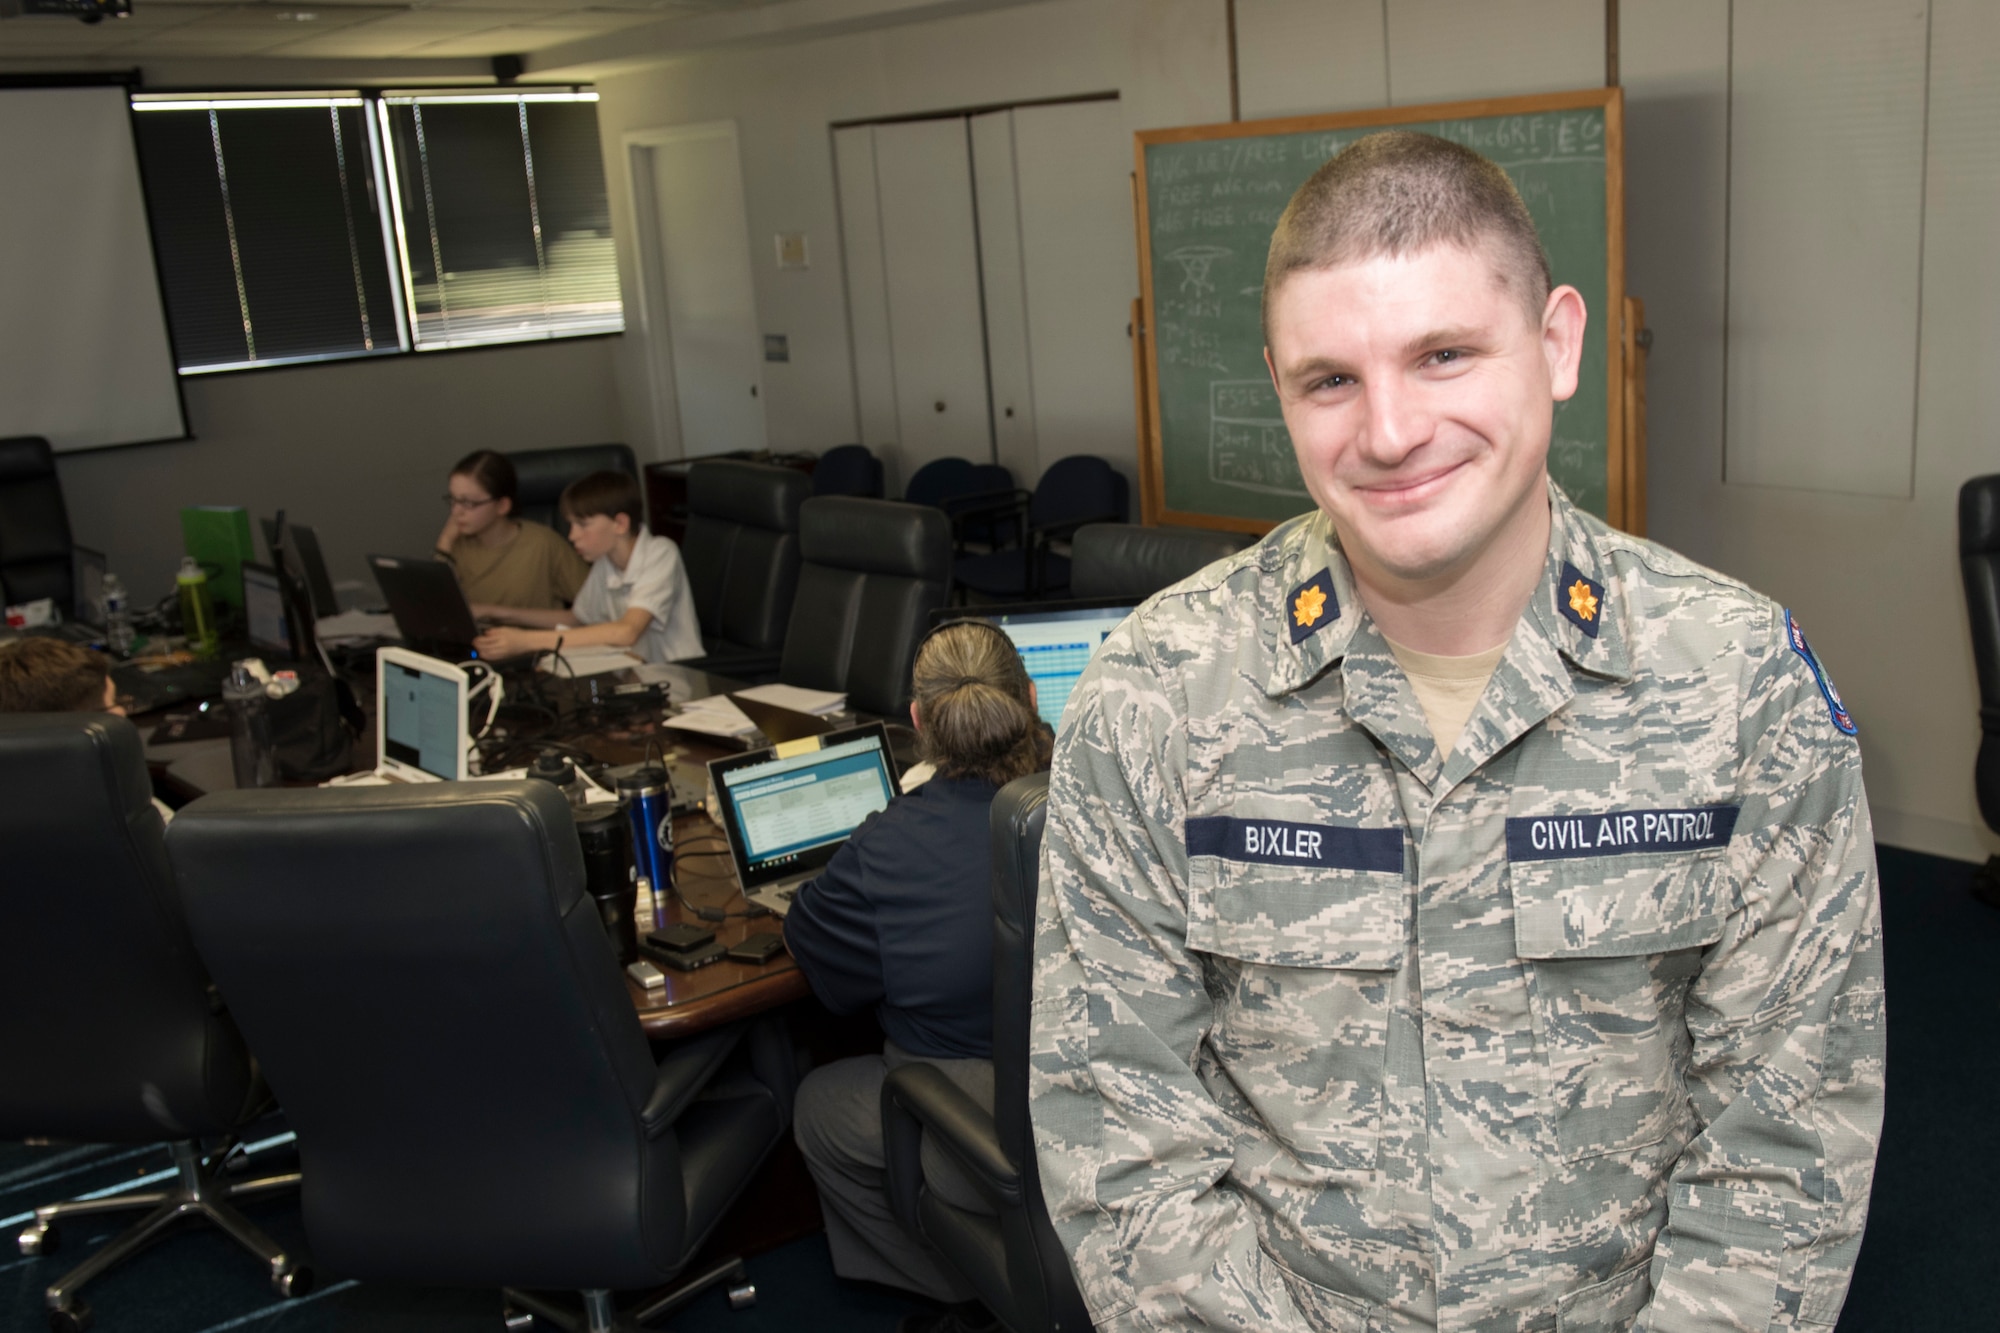 Civil Air Patrol Maj. Jacob Bixler, the Wing Director of Cadet Programs for Virginia Wing, CAP, stands in the conference room at the Winchester Regional Airport, as cadets participate in the CyberPatriot Competition, Oct. 27, 2019.  Bixler is also a technical sergeant in the 167th Airlift Wing, West Virginia Air National Guard, serving as a radio frequency transmissions systems craftsman.